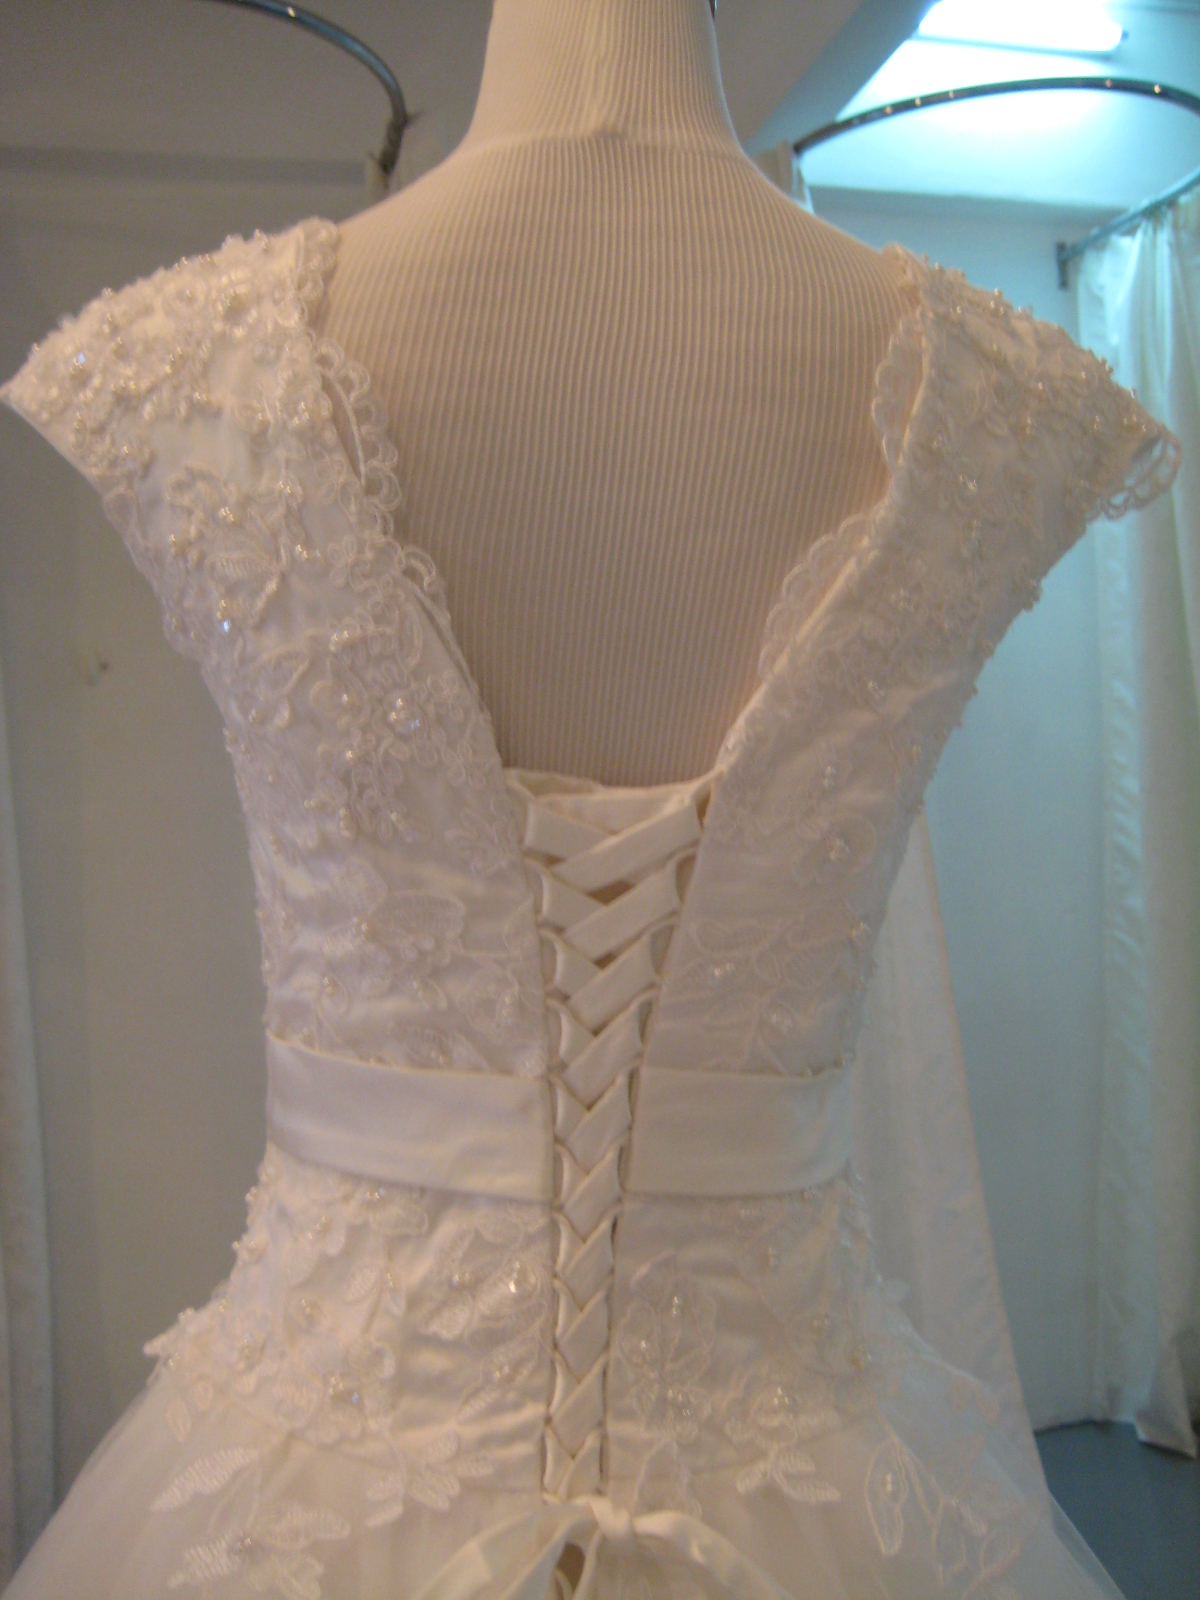 lace wedding dress with cap sleeves and open back Posted by mybridalgown at 6:57 PM